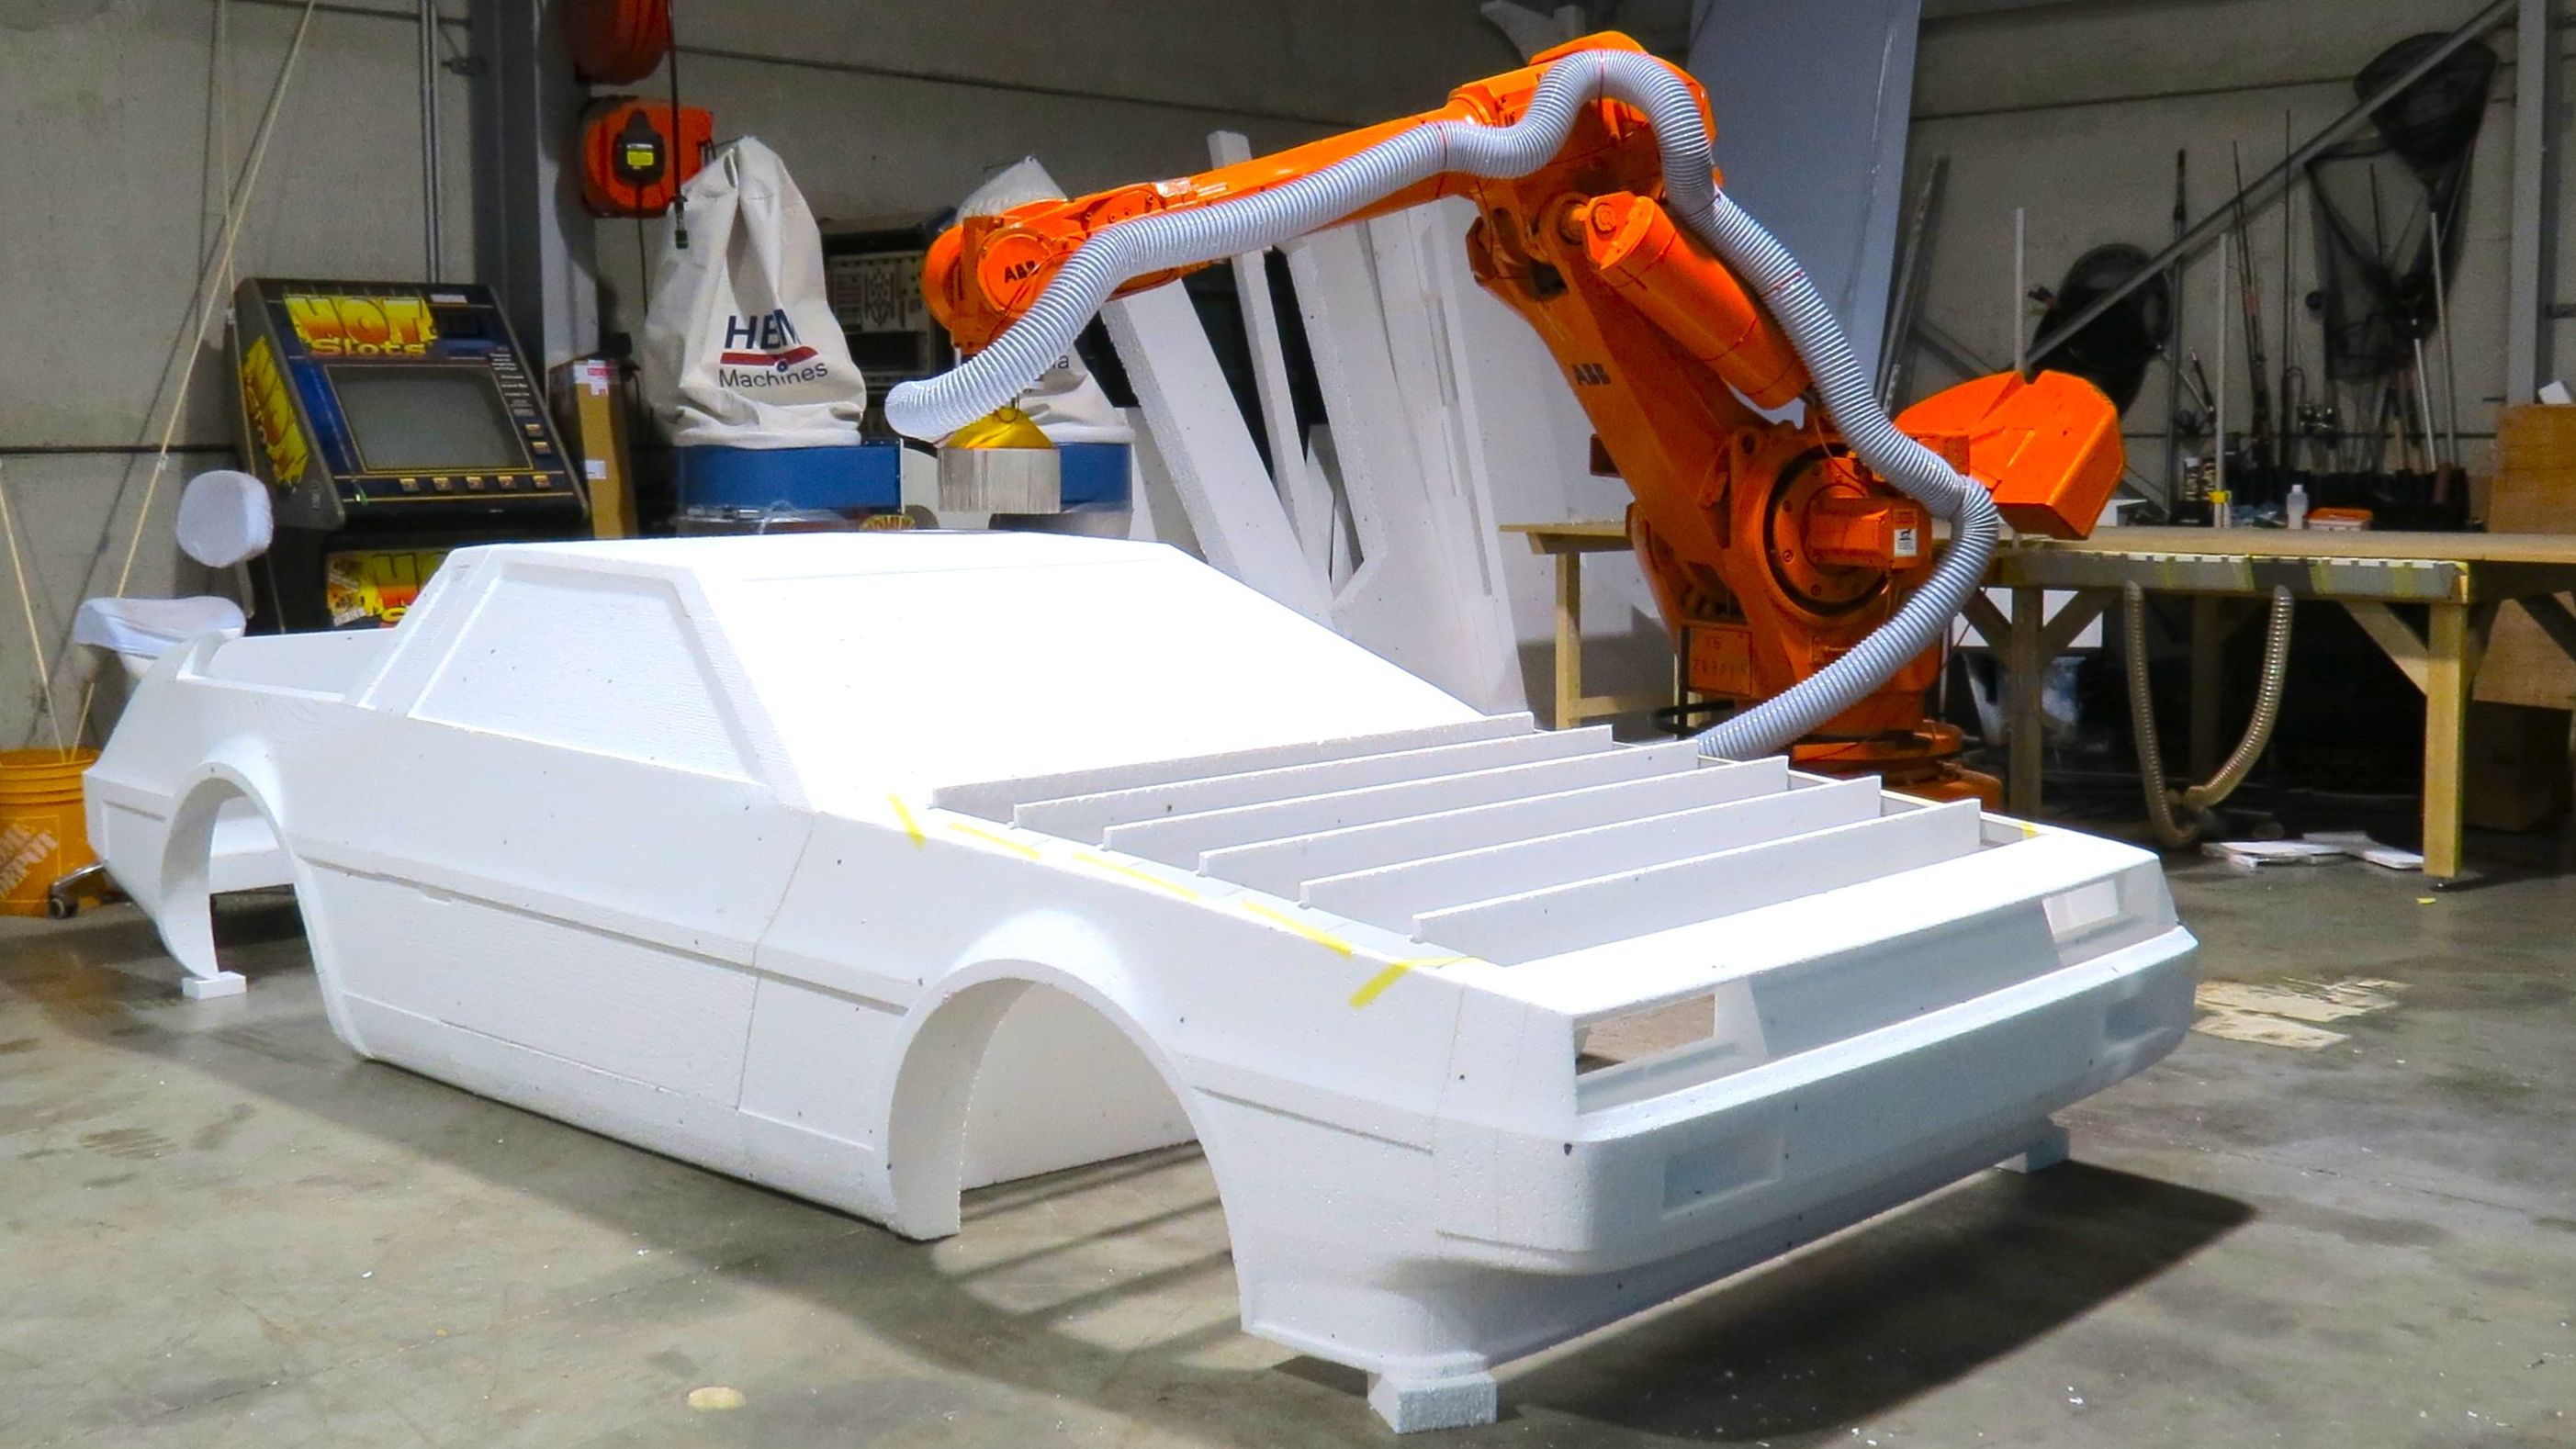 Mega-CNC router carves polystyrene foam into a life-size flying Delorean